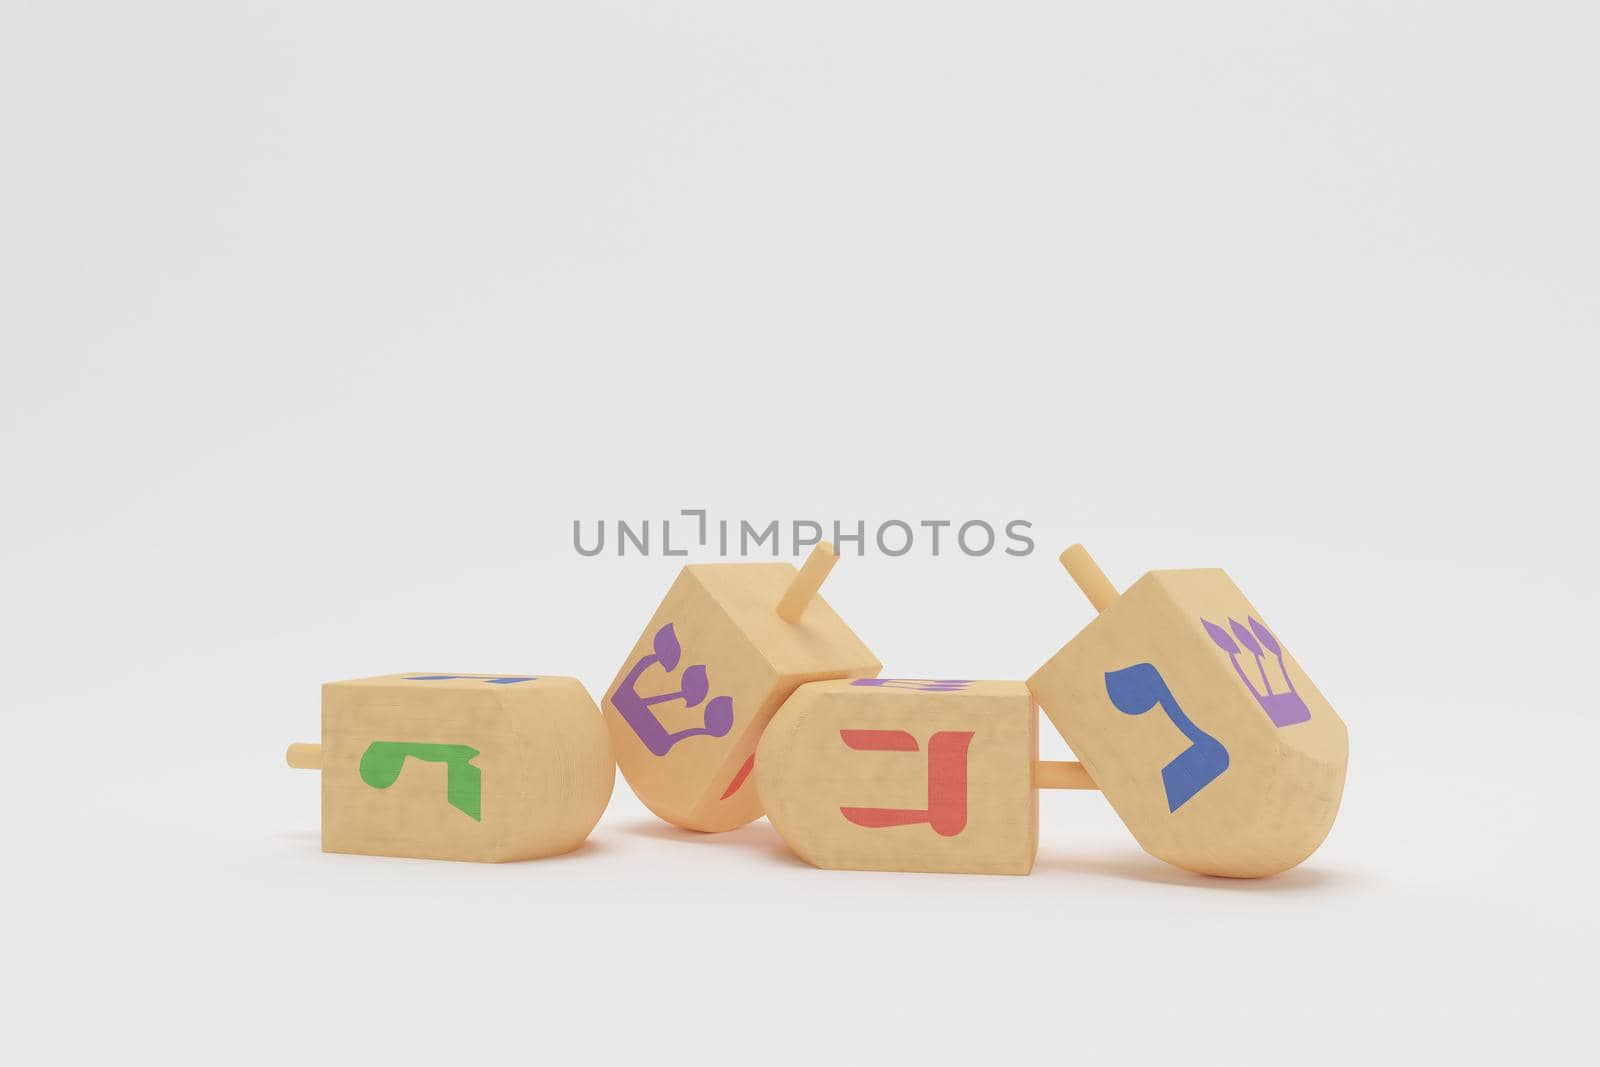 3d rendering Image of Jewish holiday Hanukkah with wooden dreidels or spinning top on a  white background. by put3d